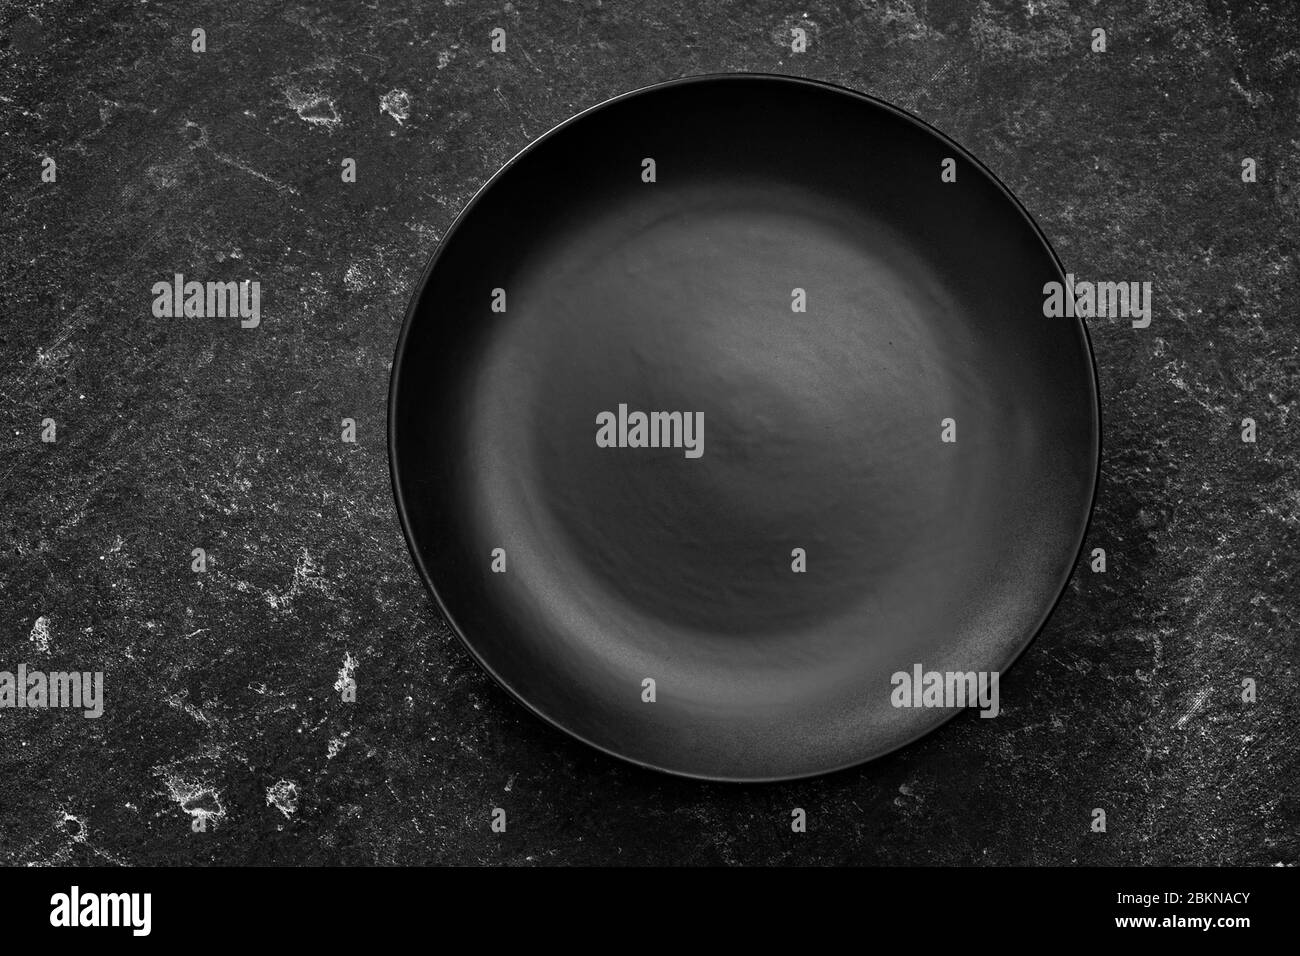 Top view of a black plate on dark background Stock Photo